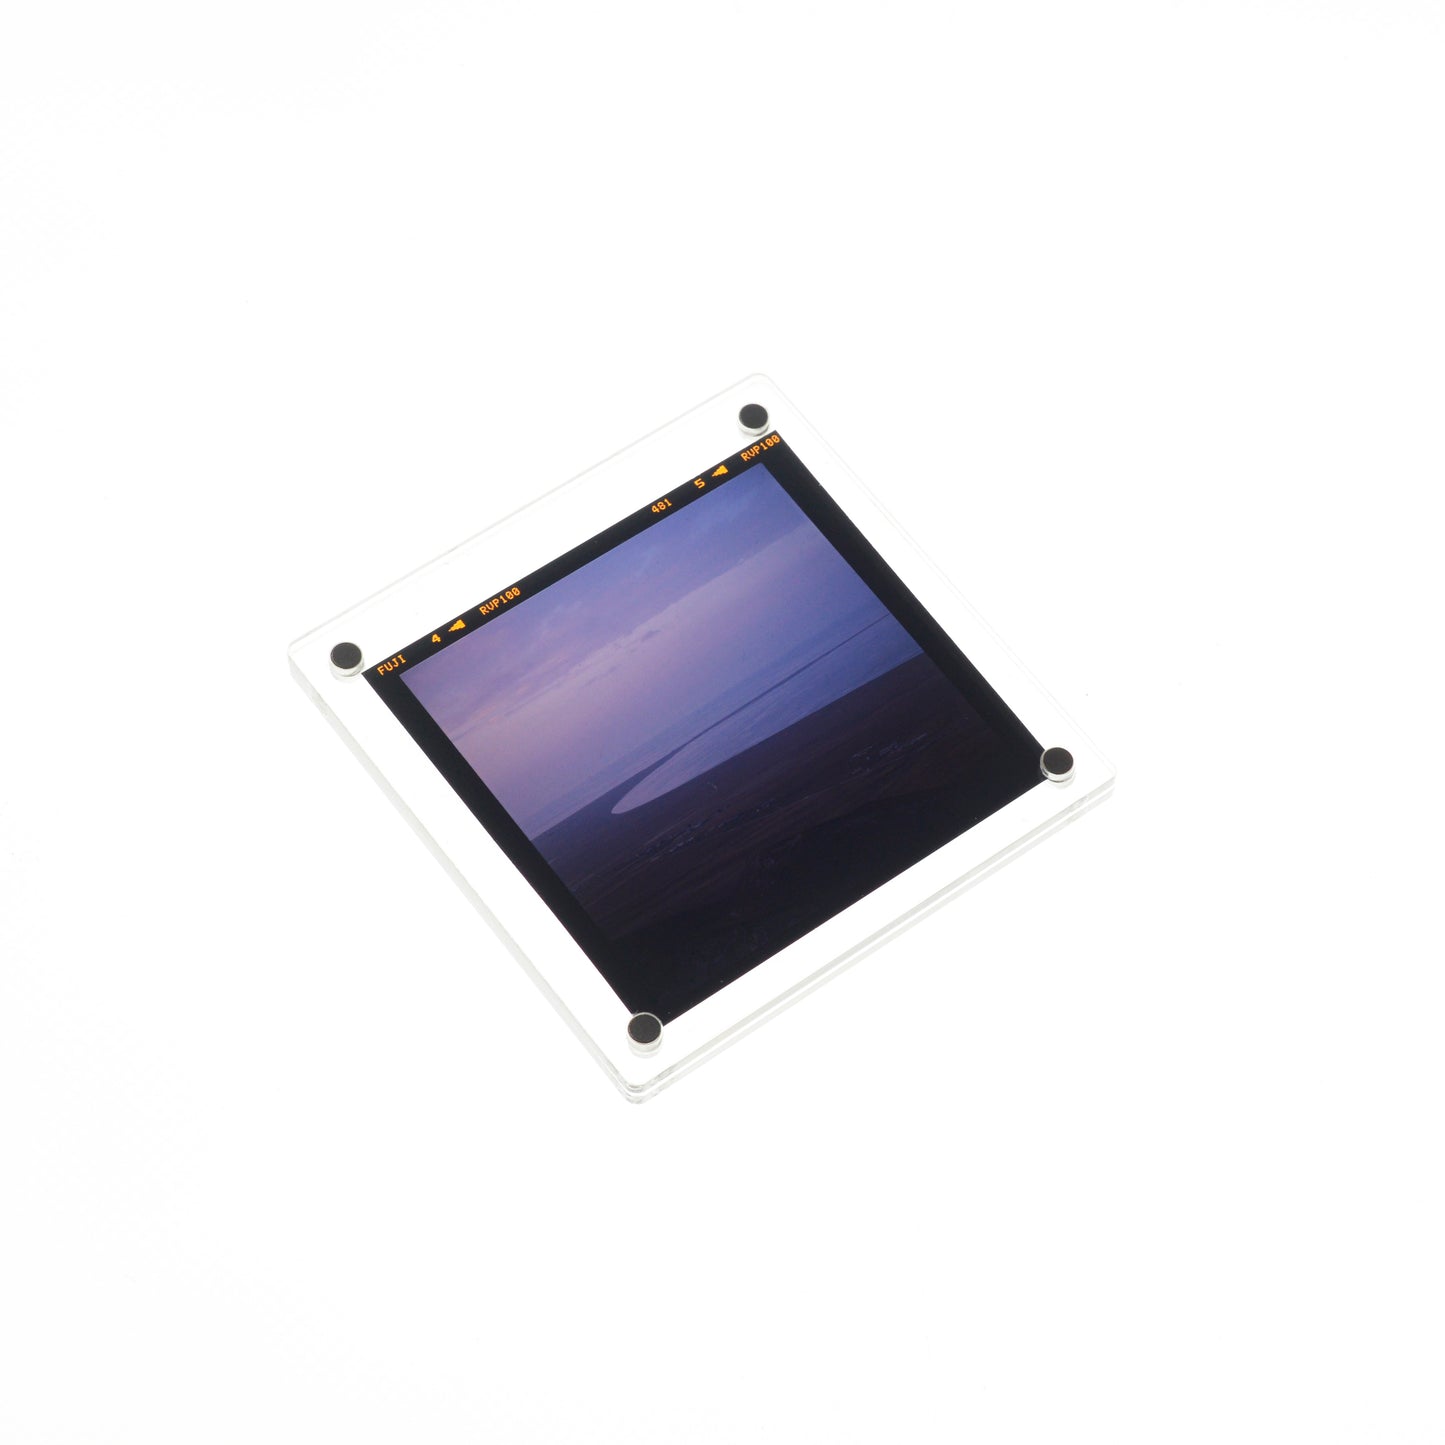 Photo Frame with Back Light for Slide Film Display, Free-shipping